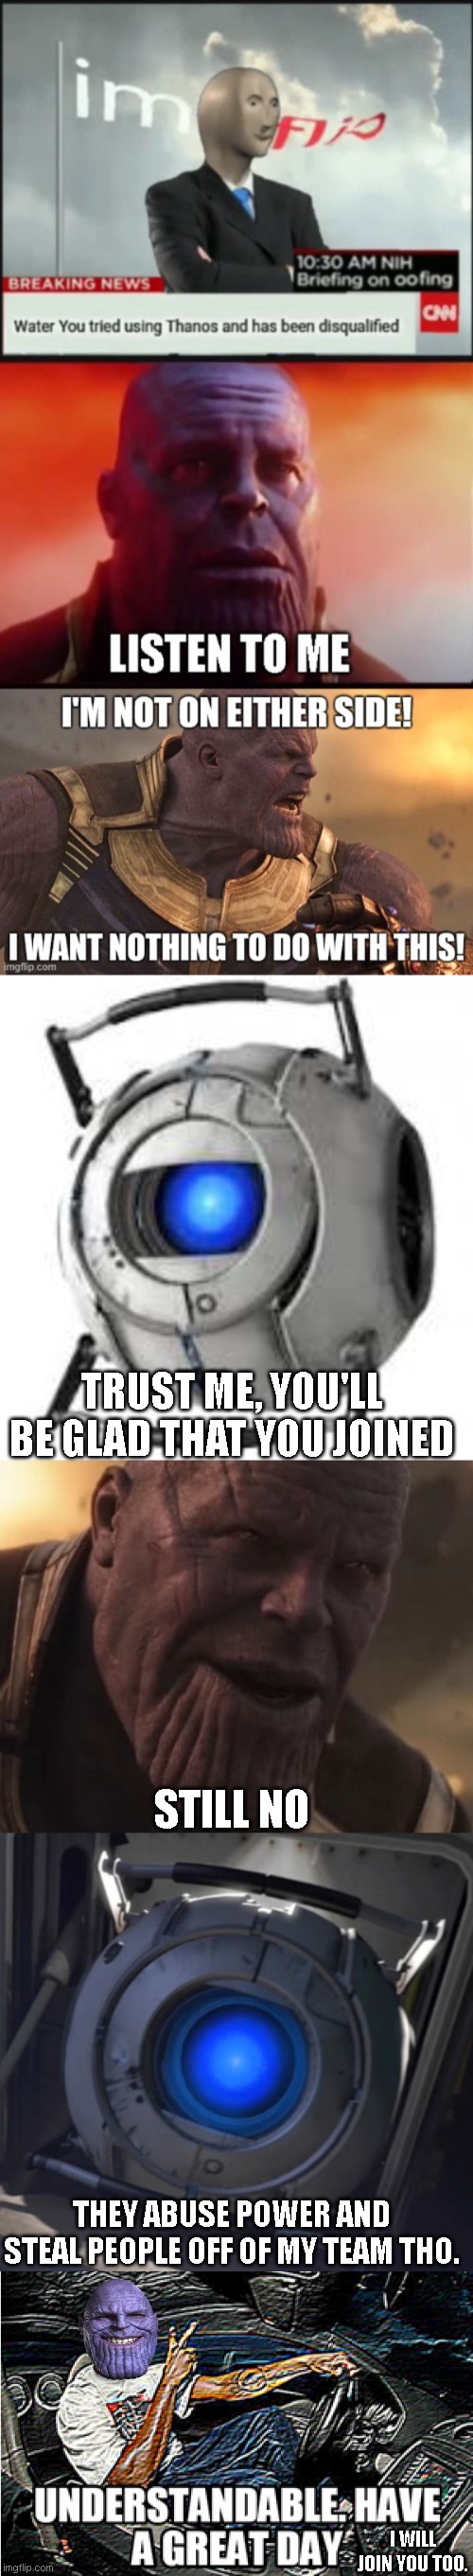 TRUST ME, YOU'LL BE GLAD THAT YOU JOINED; STILL NO; THEY ABUSE POWER AND STEAL PEOPLE OFF OF MY TEAM THO. I WILL JOIN YOU TOO. | image tagged in wheatley,thanos all that for a drop of blood,understandable have a great day | made w/ Imgflip meme maker